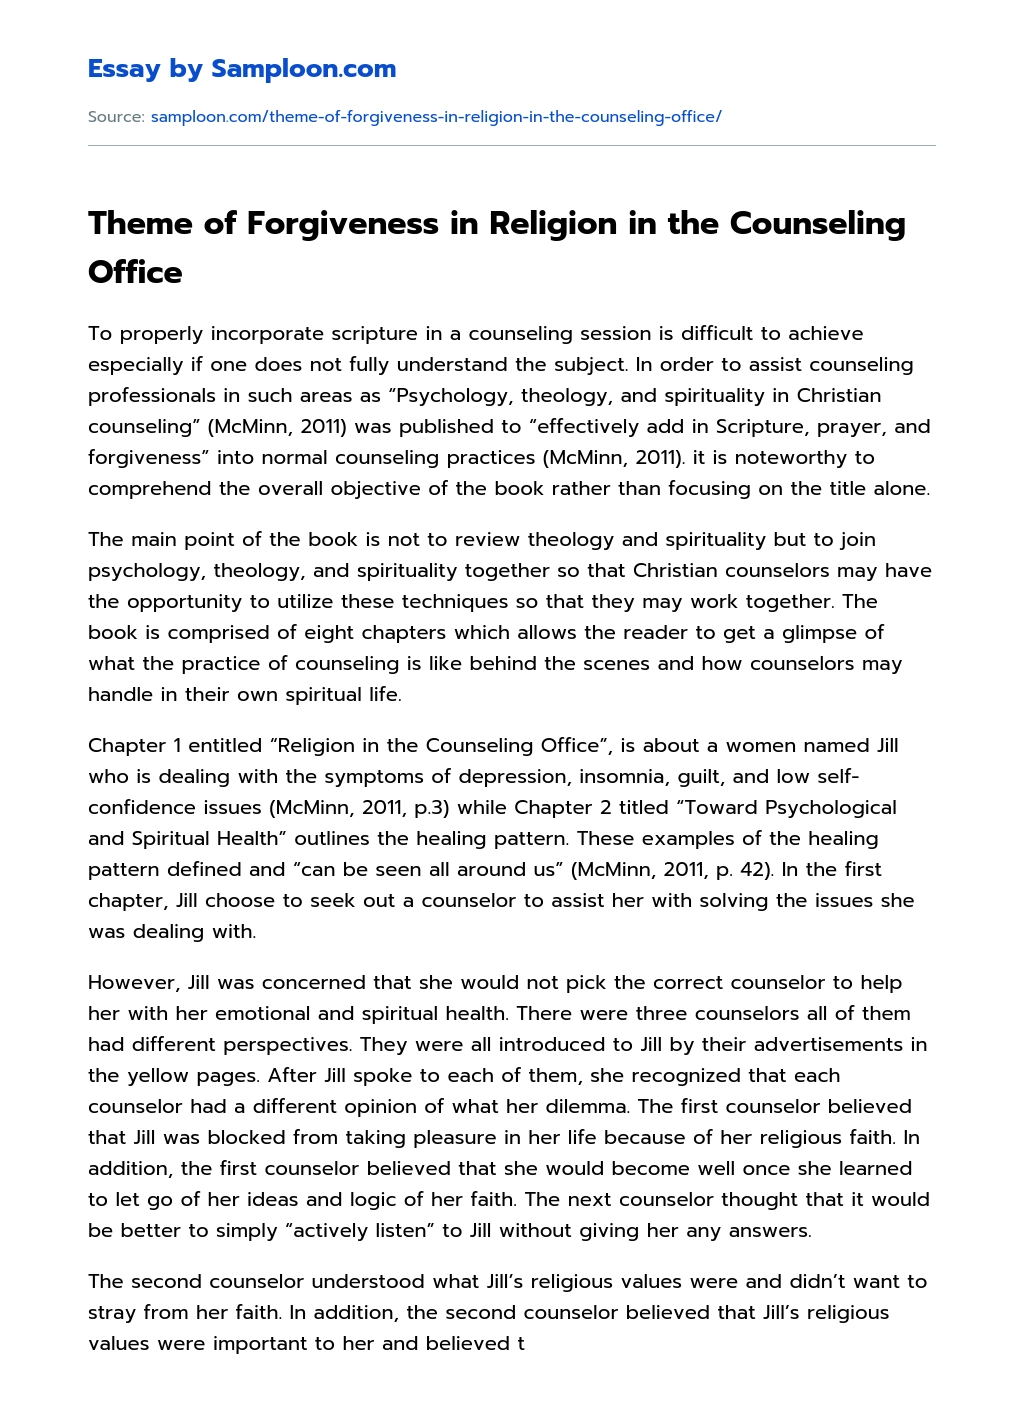 Theme of Forgiveness in Religion in the Counseling Office essay